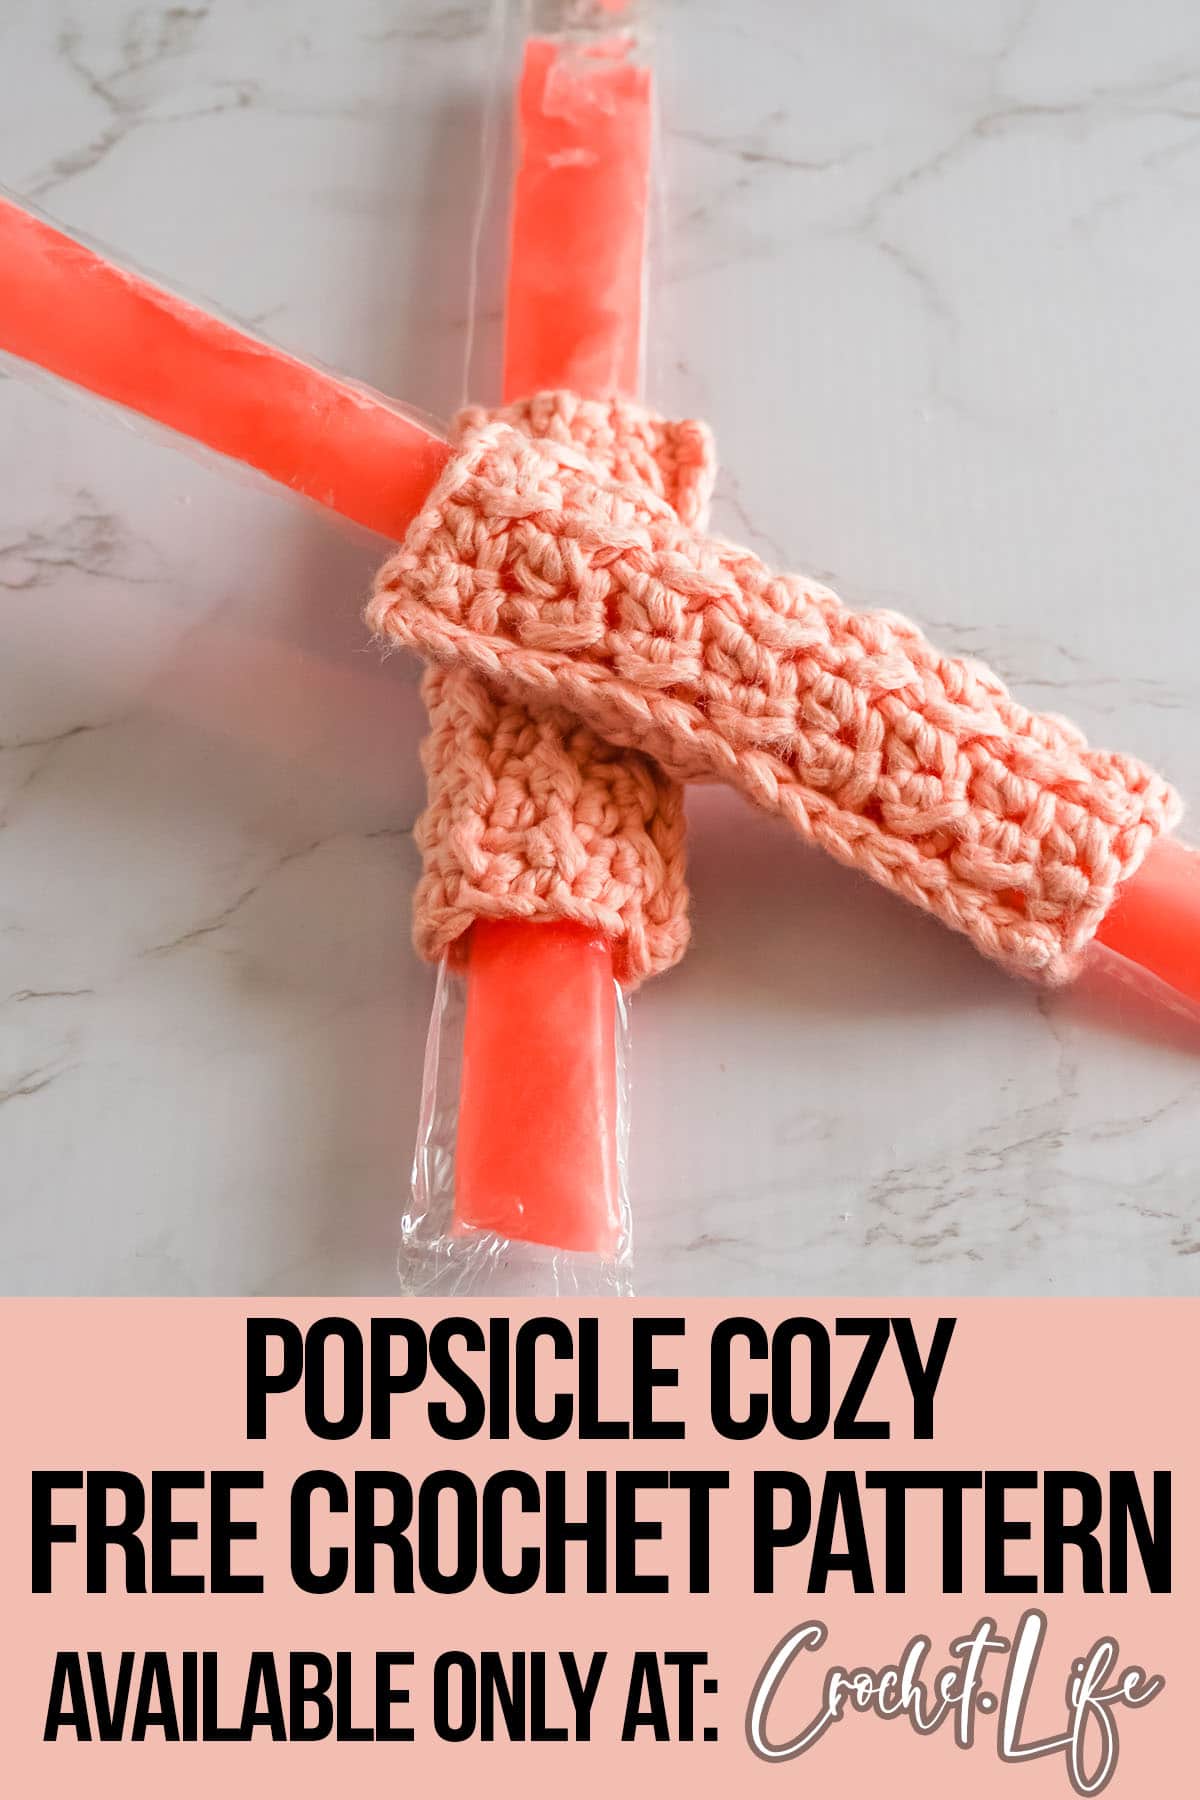 free ice pop cozy crochet pattern with text which reads popsicle cozy free crochet pattern